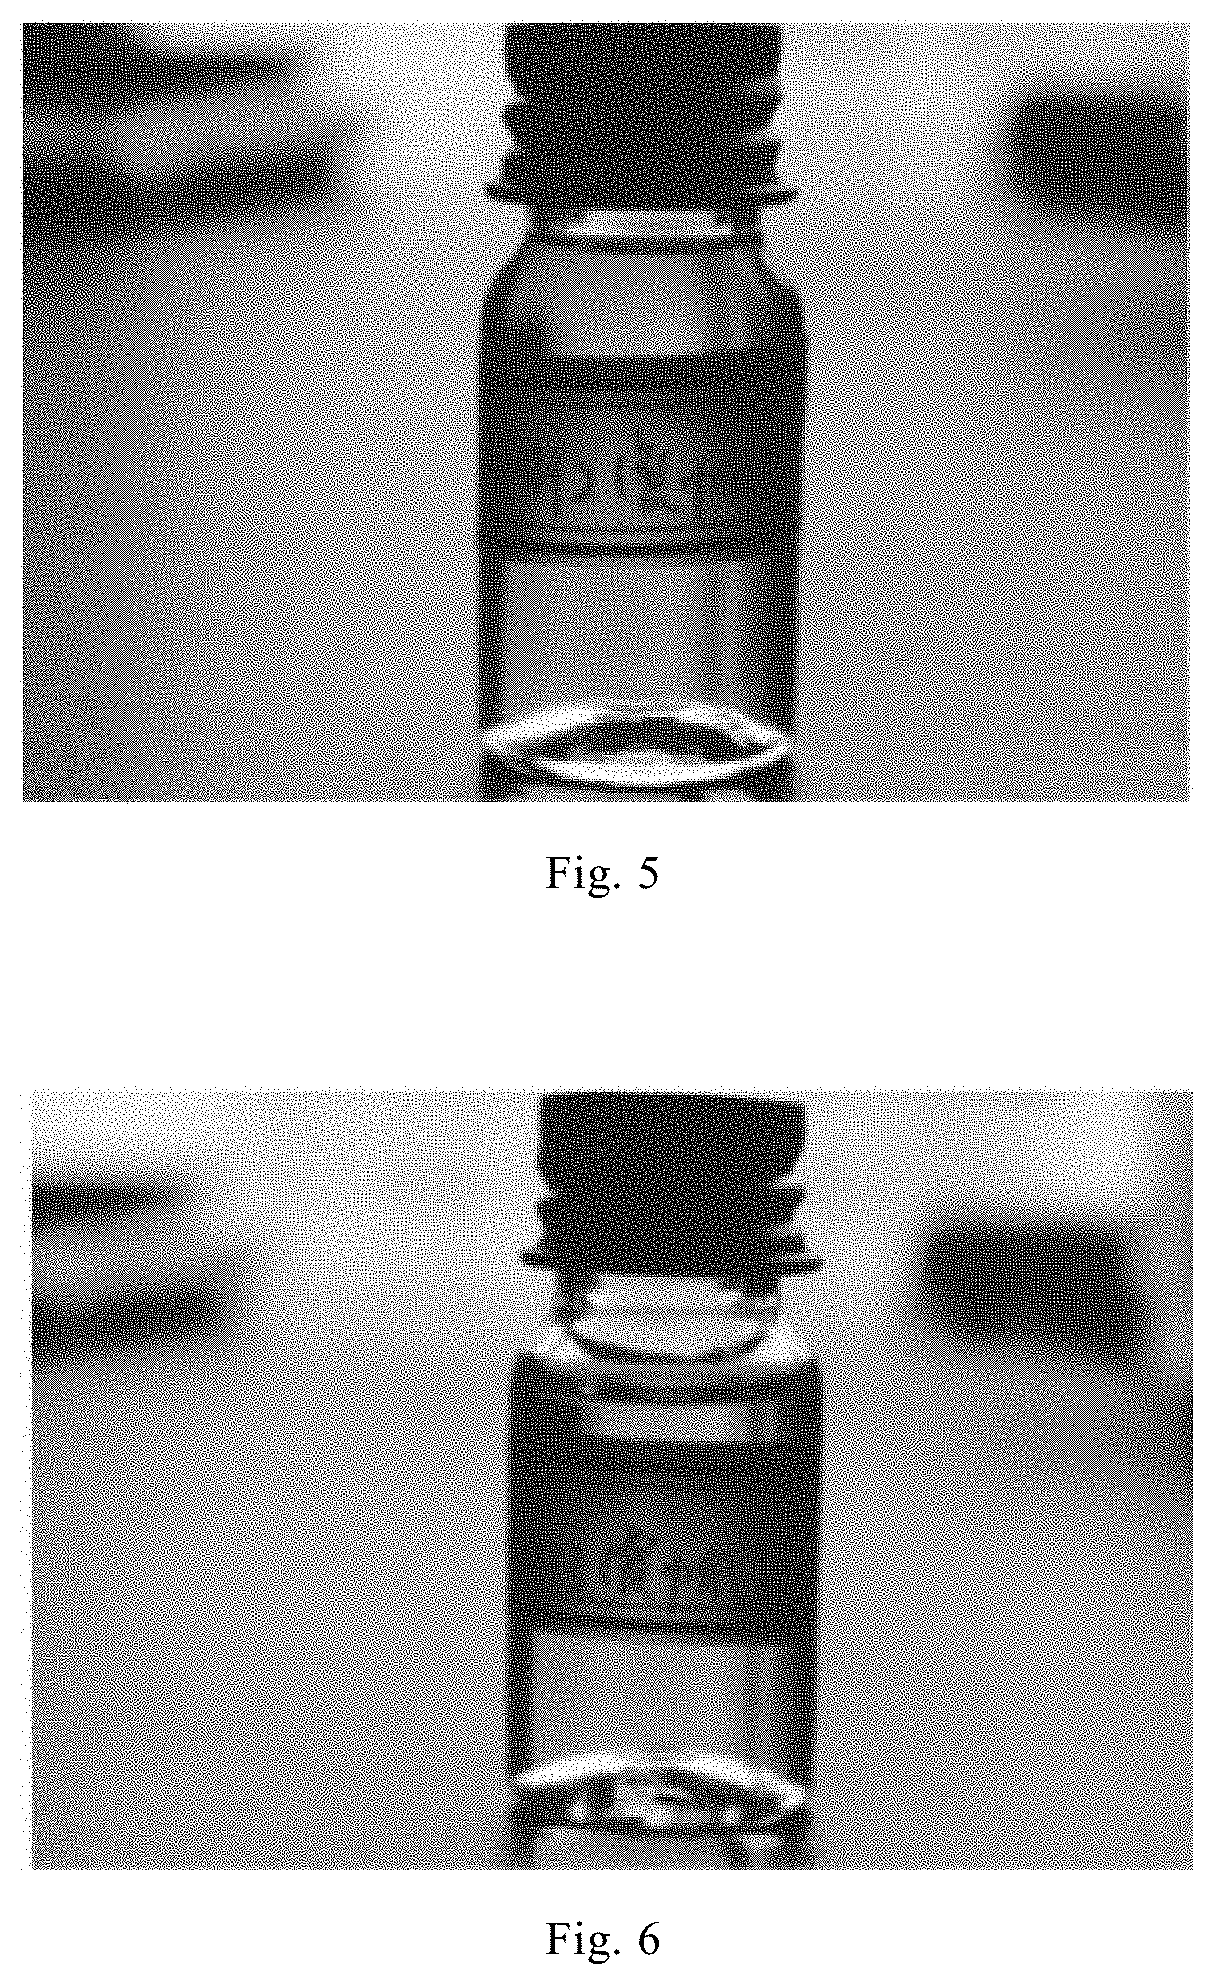 Method for developing biological trace evidence on porous object